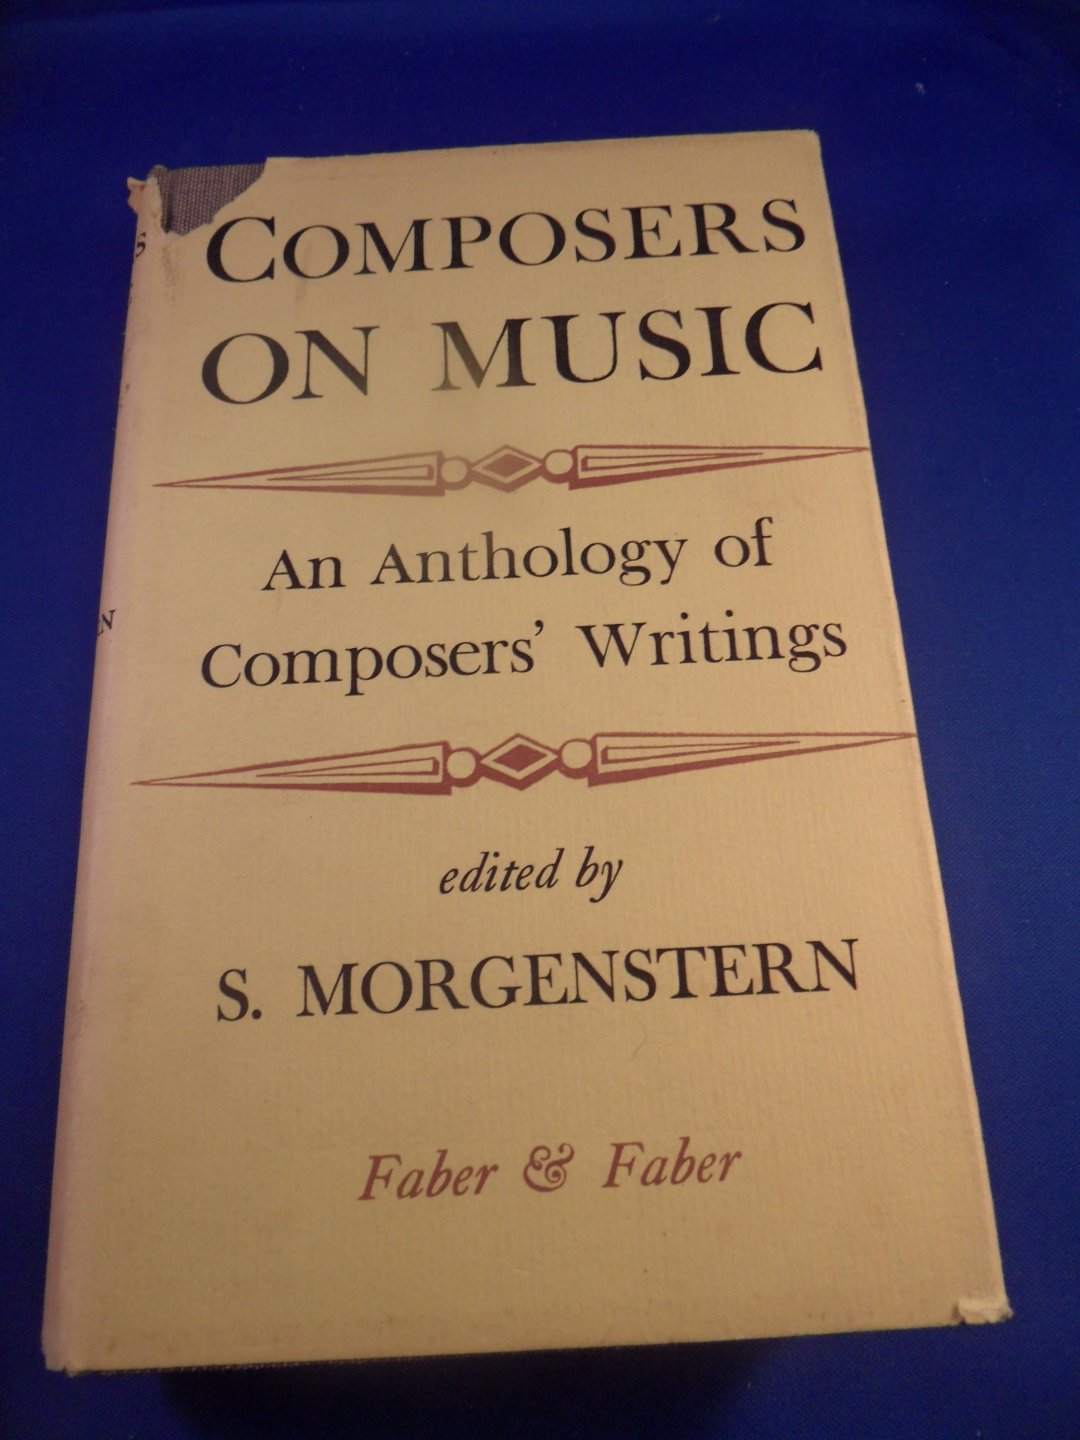 Morgenstern, S. - Composers on music. An anthology of composer's writings